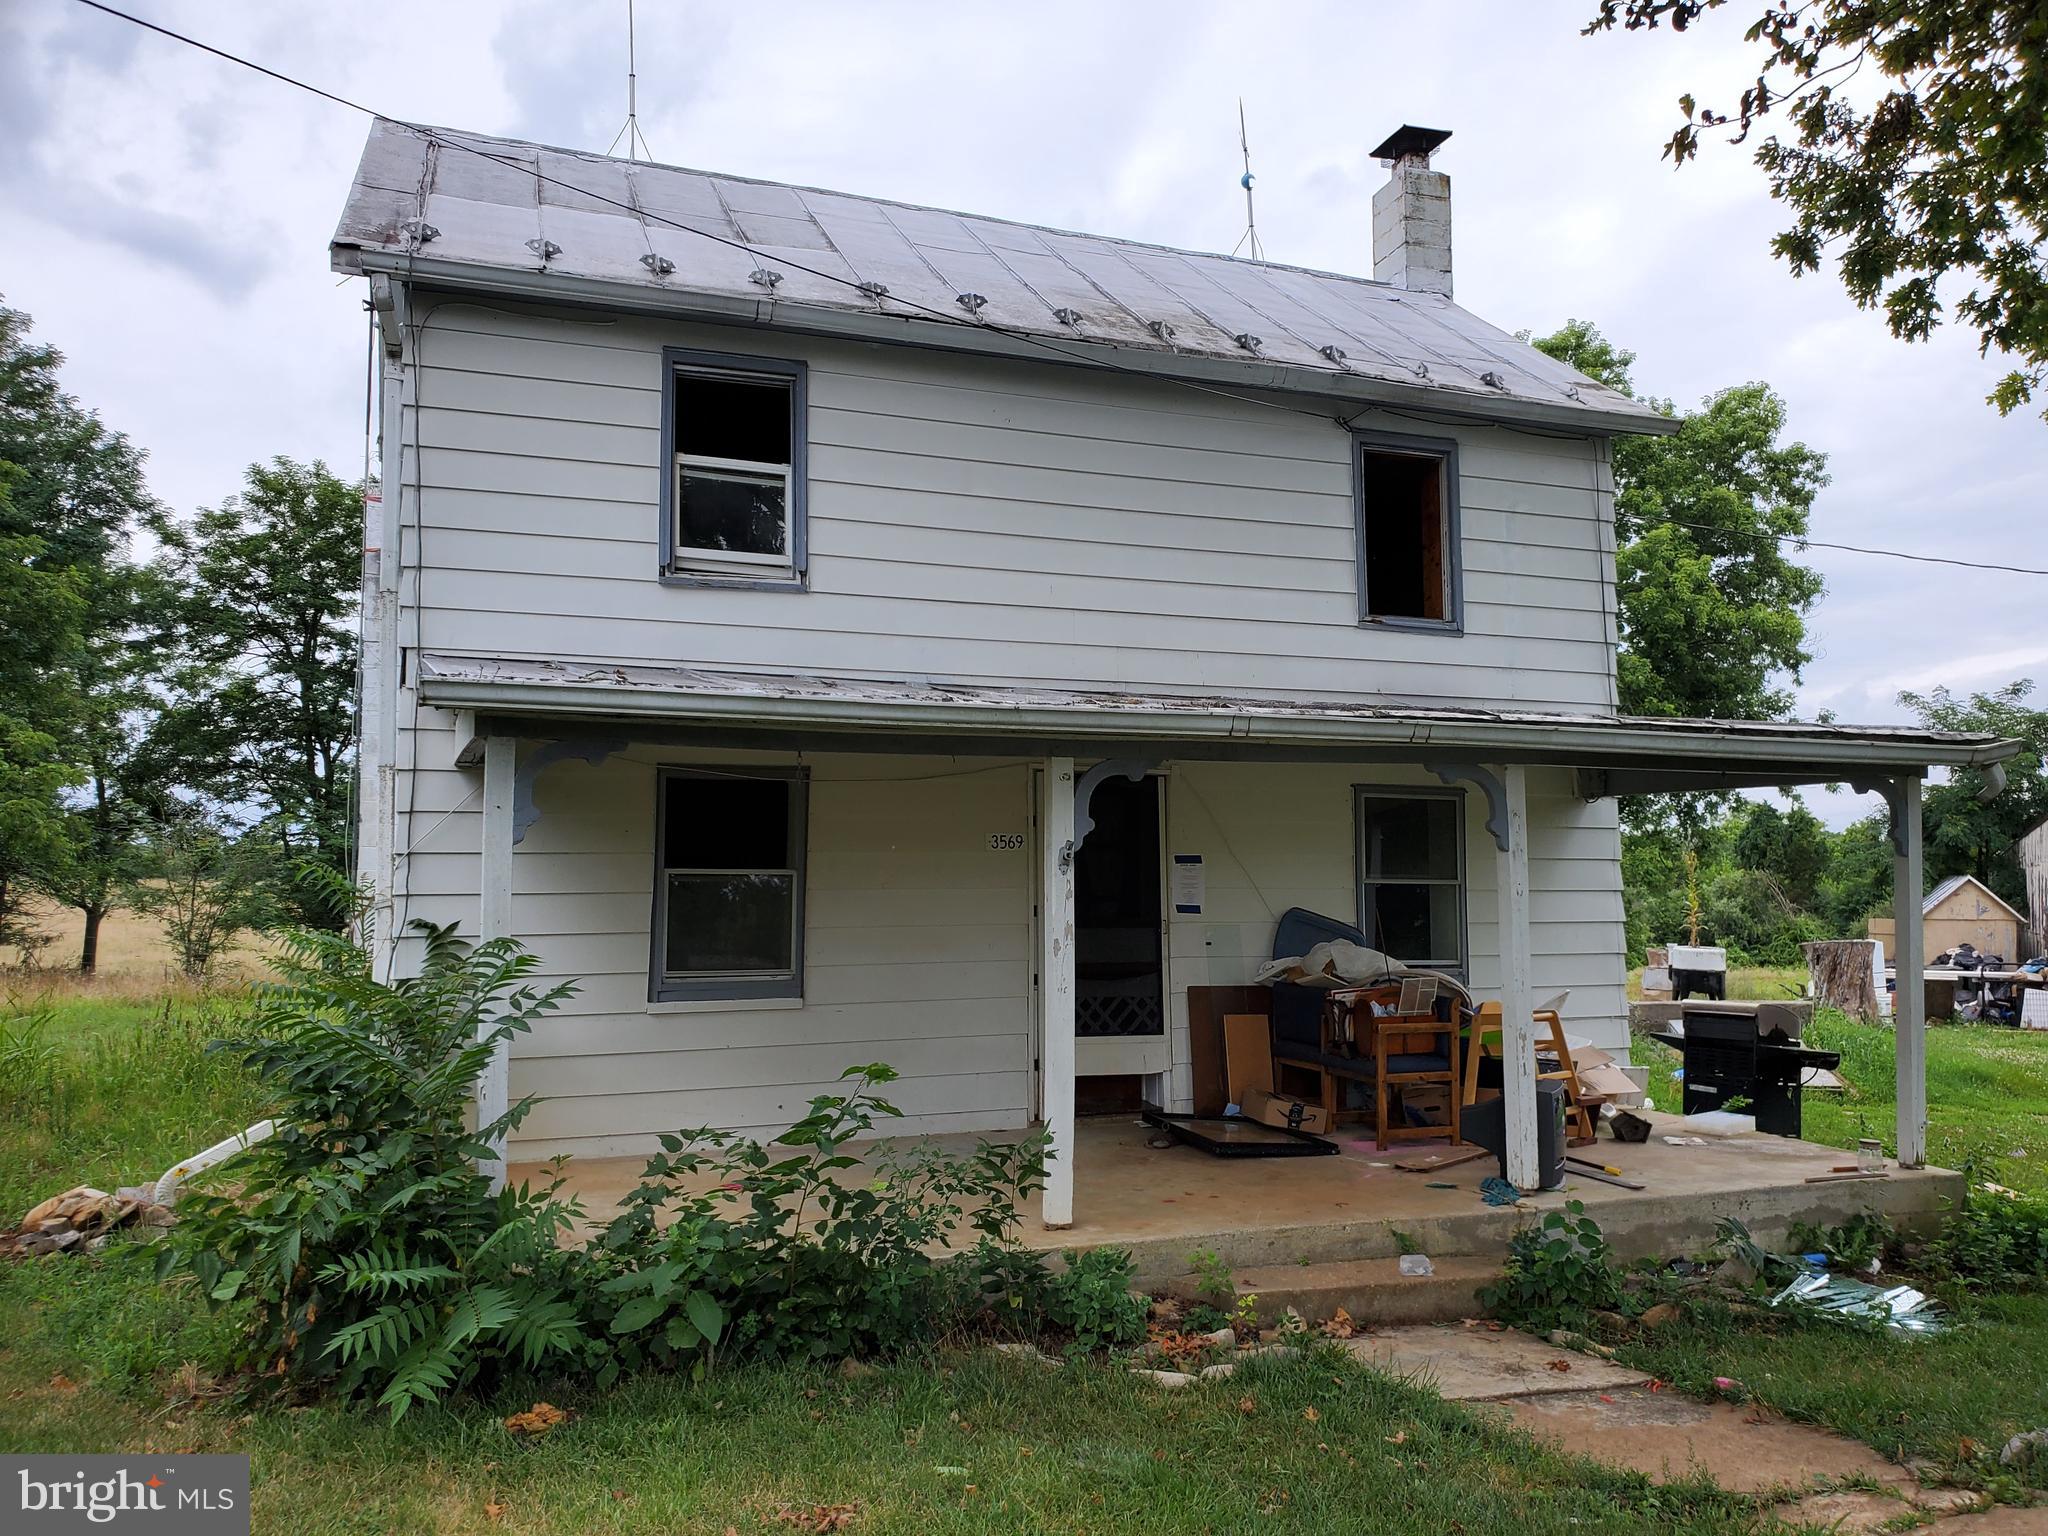 4 BR 1 Bath Older home on 3 acres.  Conveniently located between Winchester & Berryville.